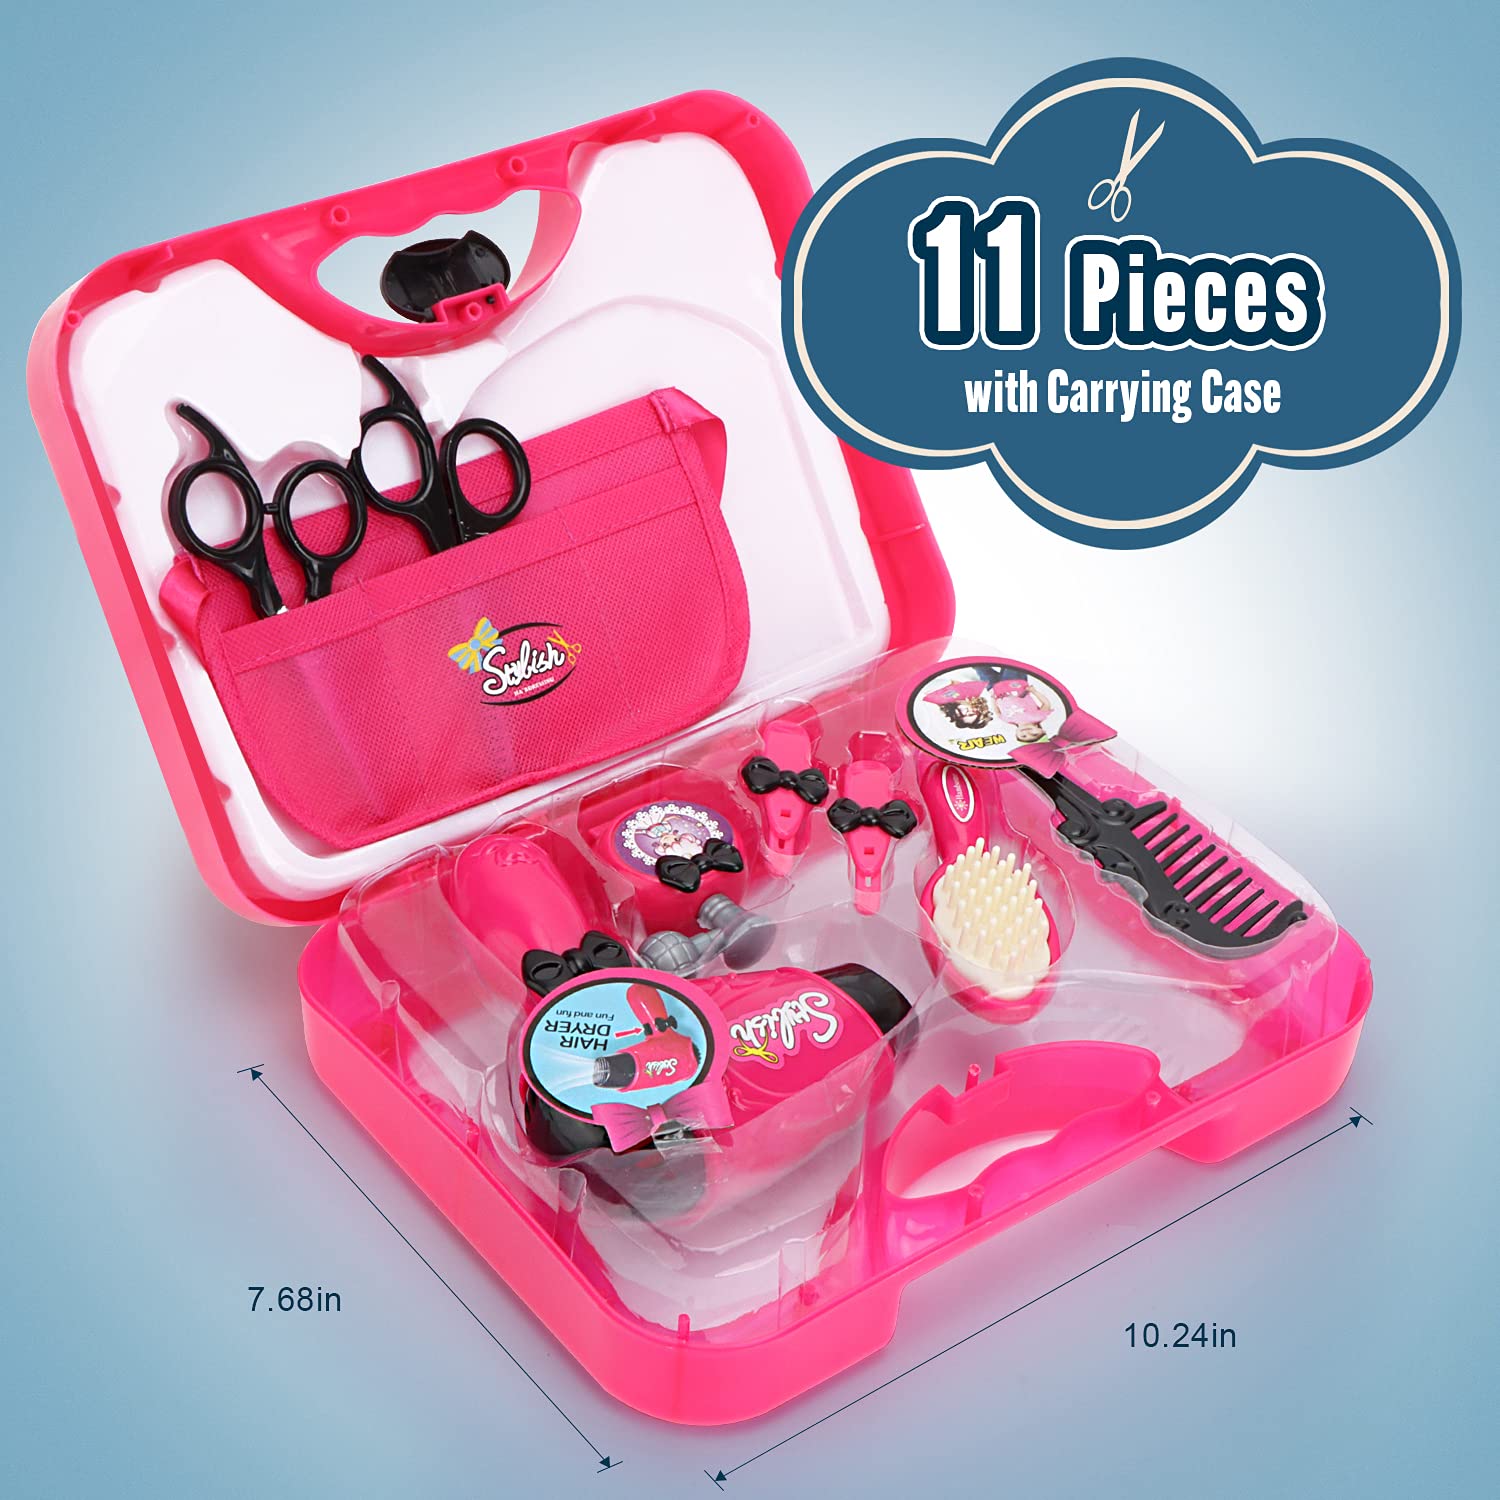 Hapgo Girls Beauty Salon Set Pretend Play Stylist Hair Cutting Kit Hairdresser Toys with Hair Dryer, Scissors, Barber Apron and Styling Accessories